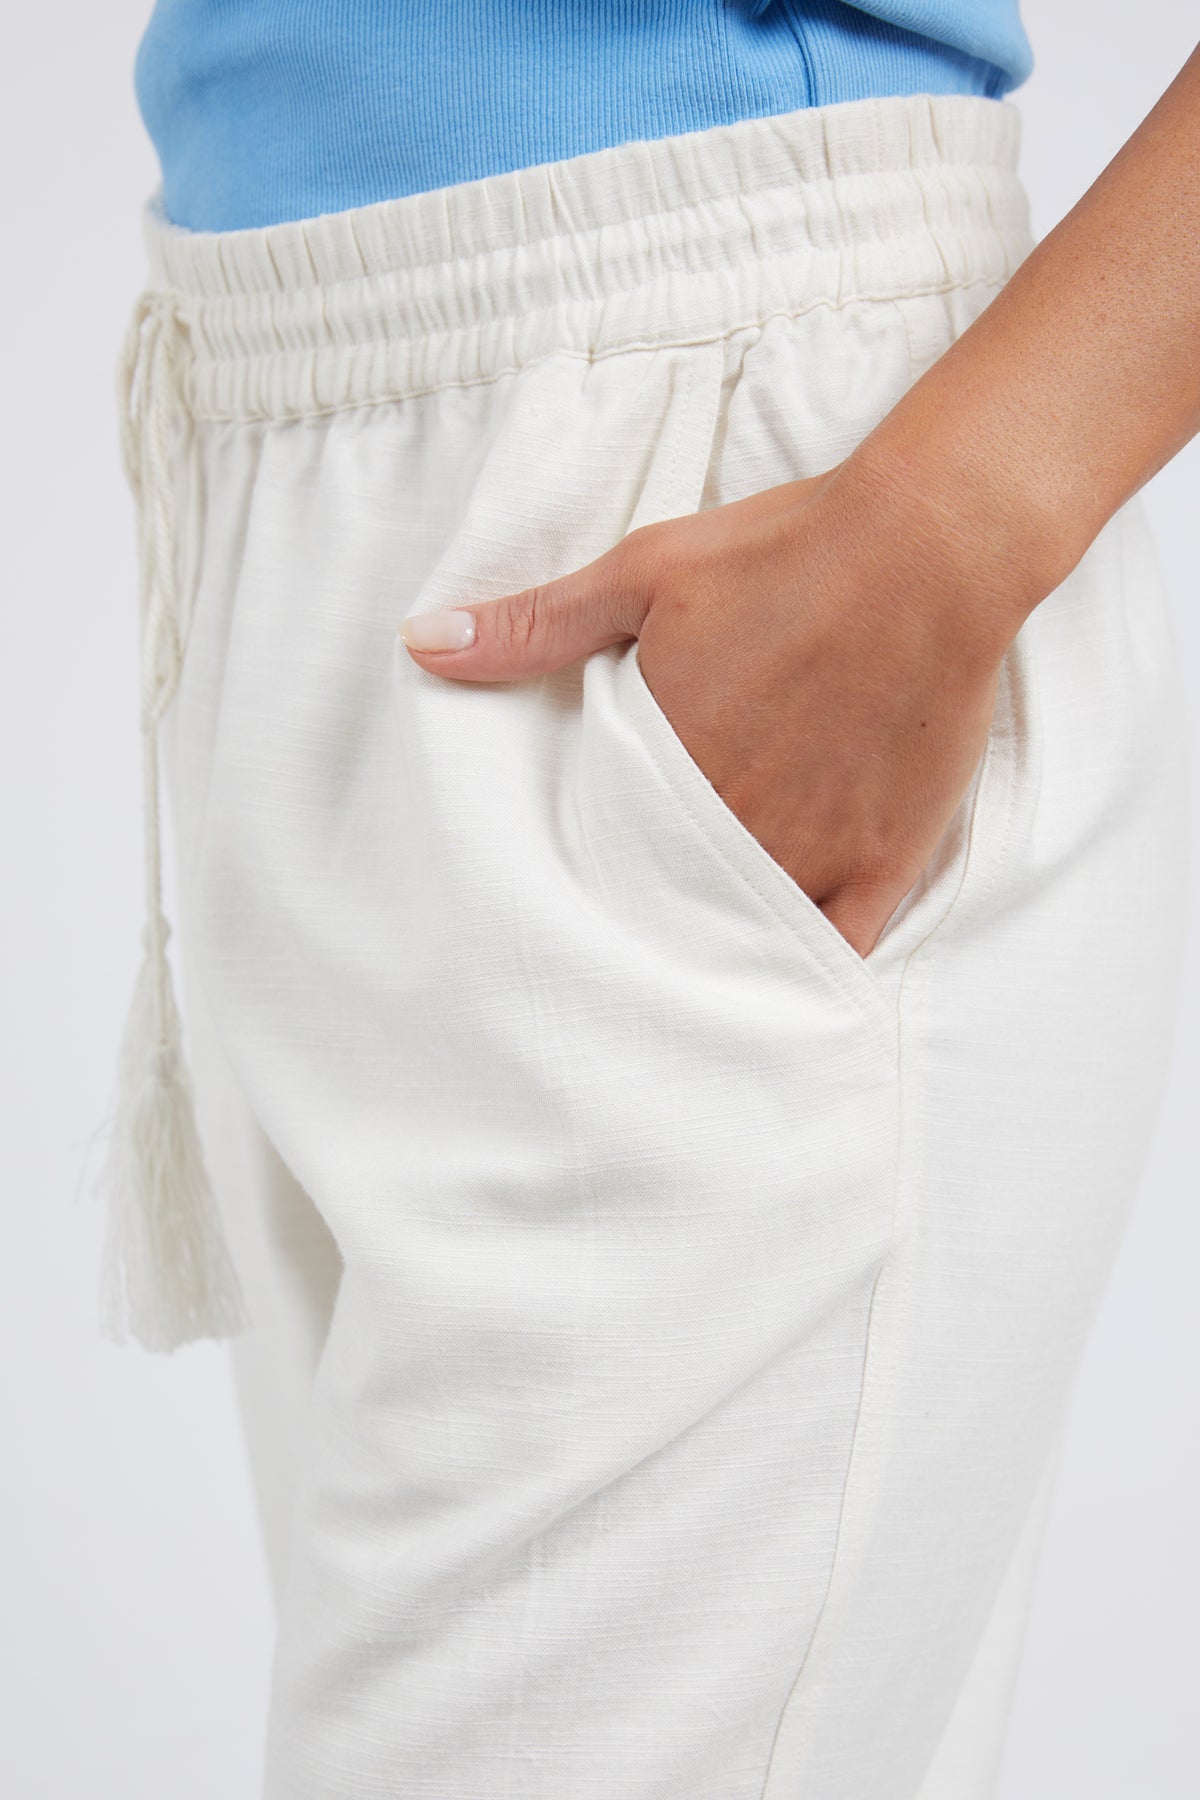 Clem Relaxed Pant Toasted Coconut